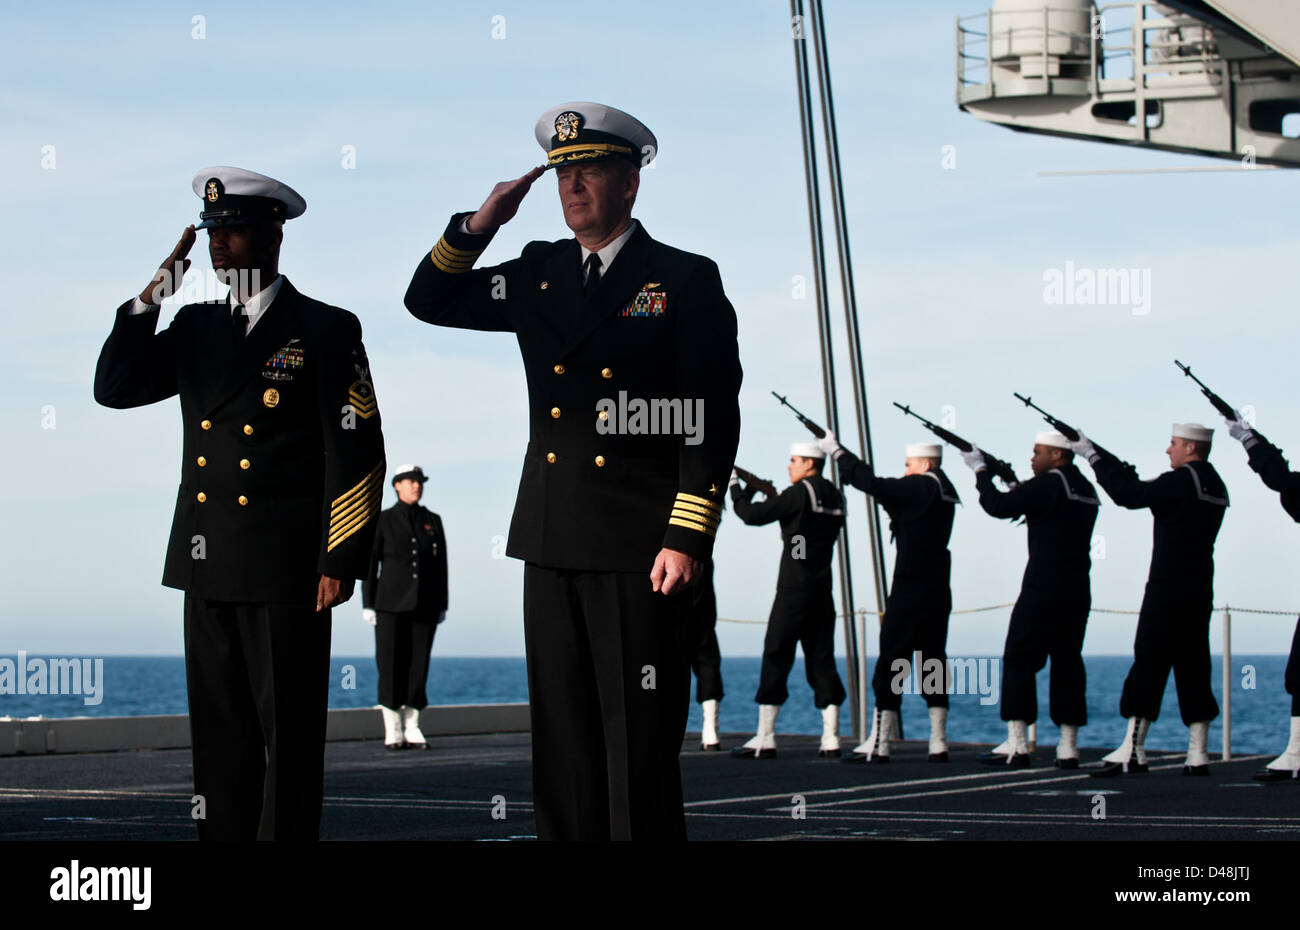 USS Carl Vinson conducts a burial at sea. Stock Photo